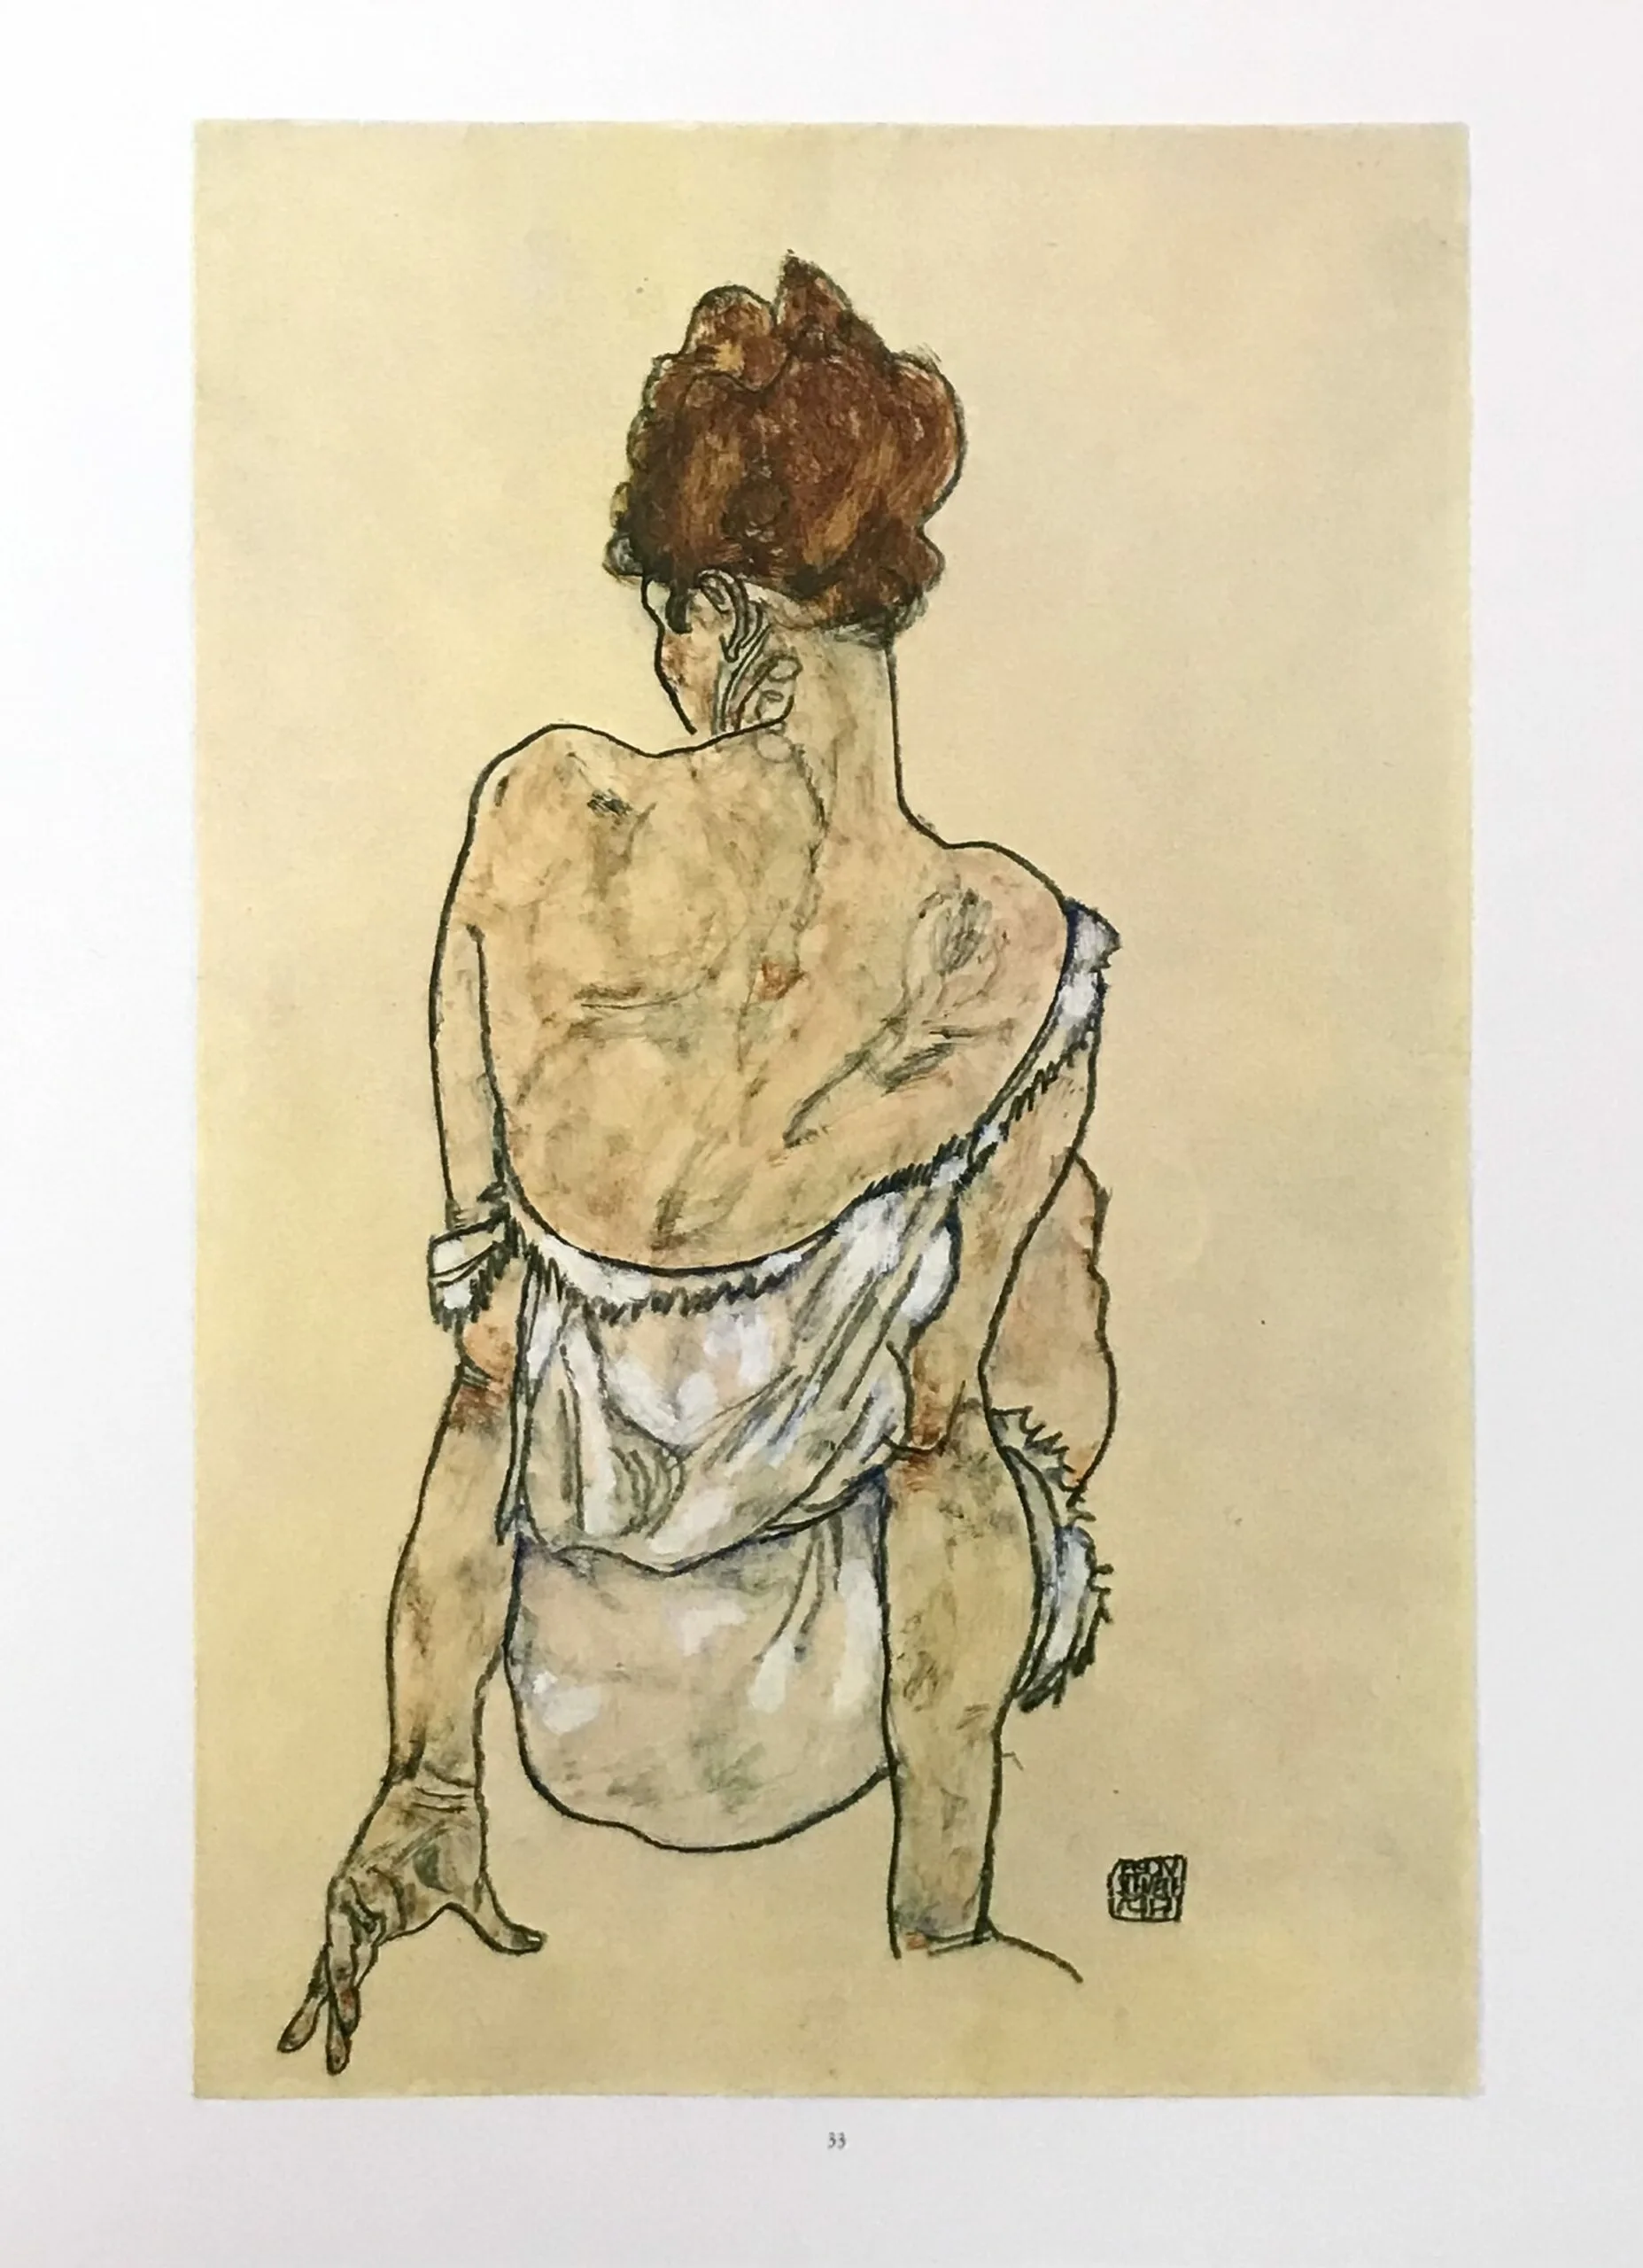 1981 Egon Schiele 33 Erotic Drawing Seated woman back view